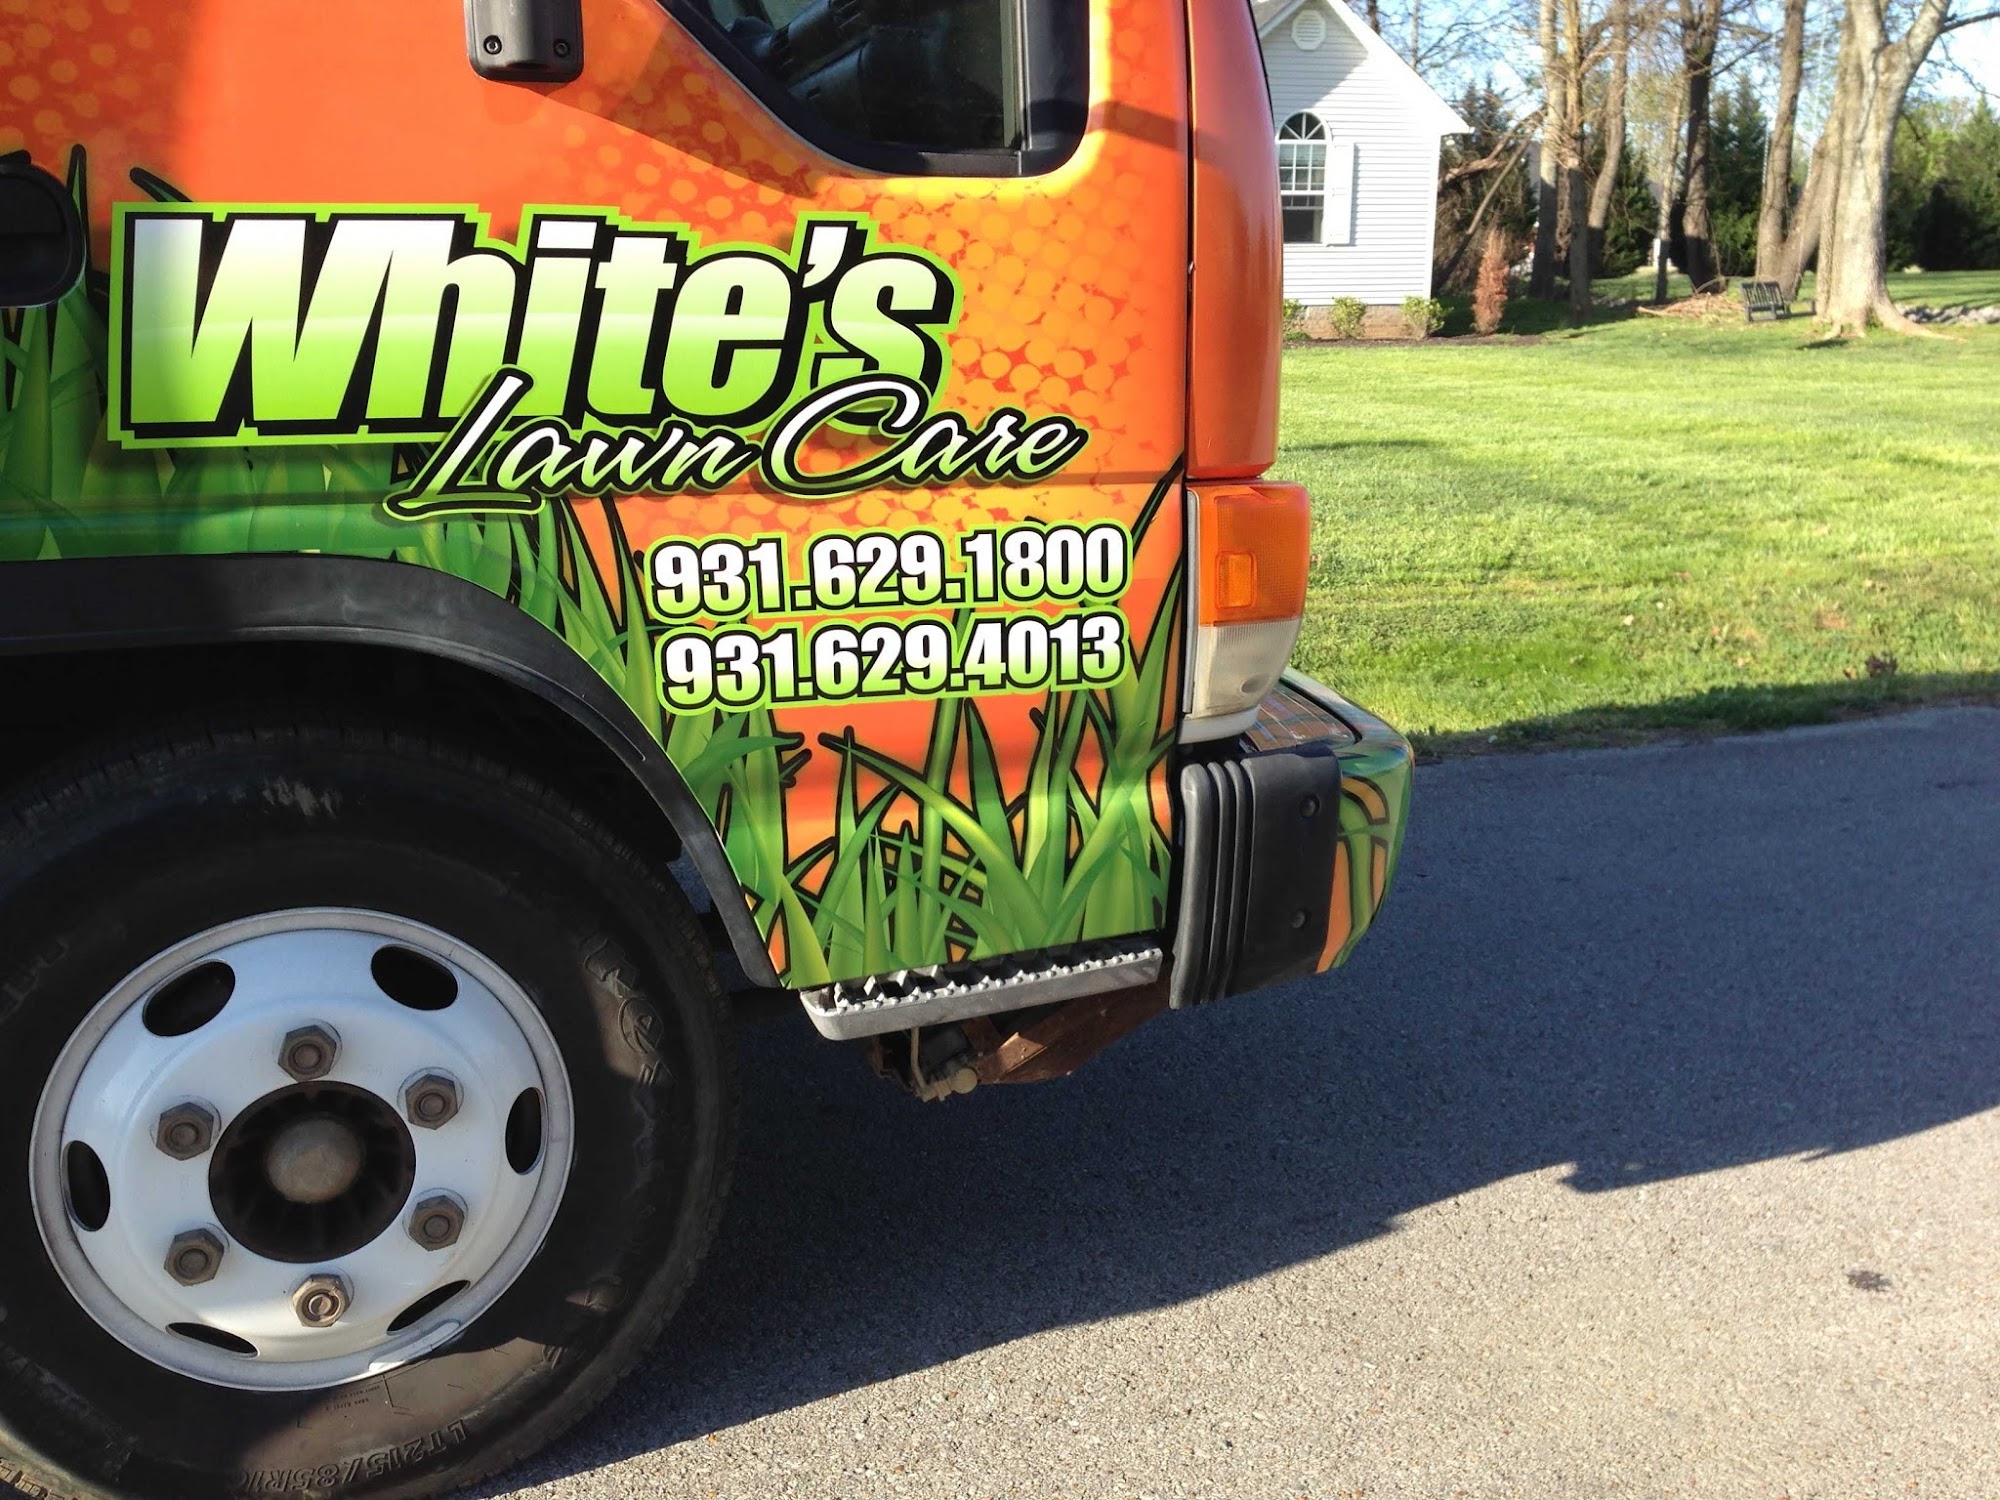 White's Lawn Care 240 Balee Dr, Ethridge Tennessee 38456